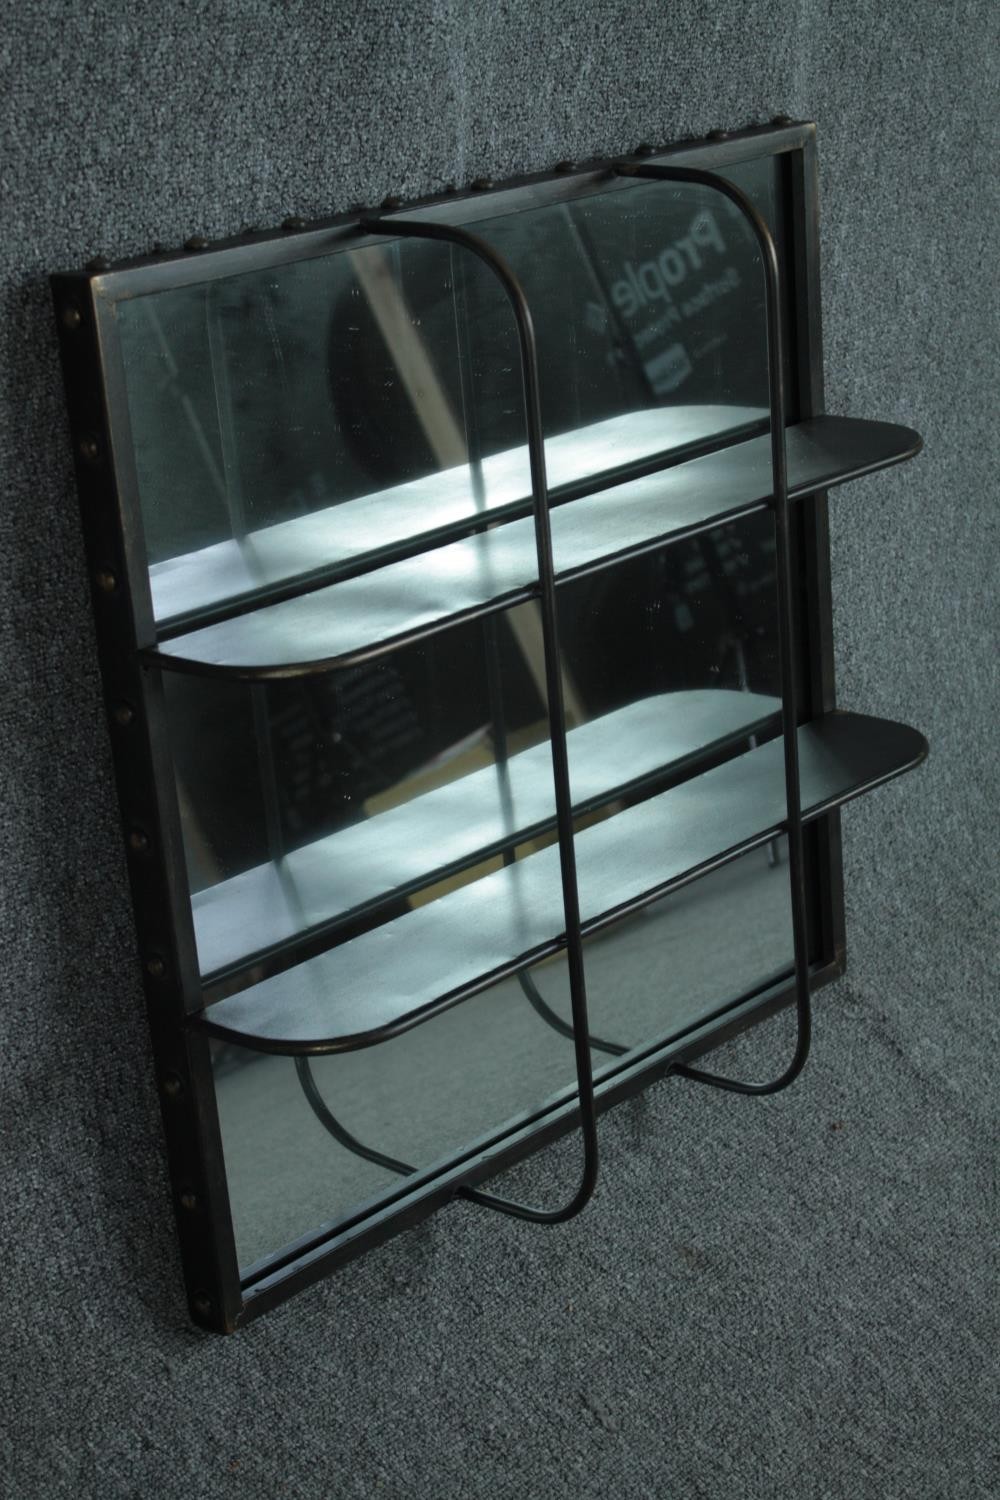 An industrial style metal framed bathroom mirror with shelving. H.61 W.61 cm. - Image 2 of 5